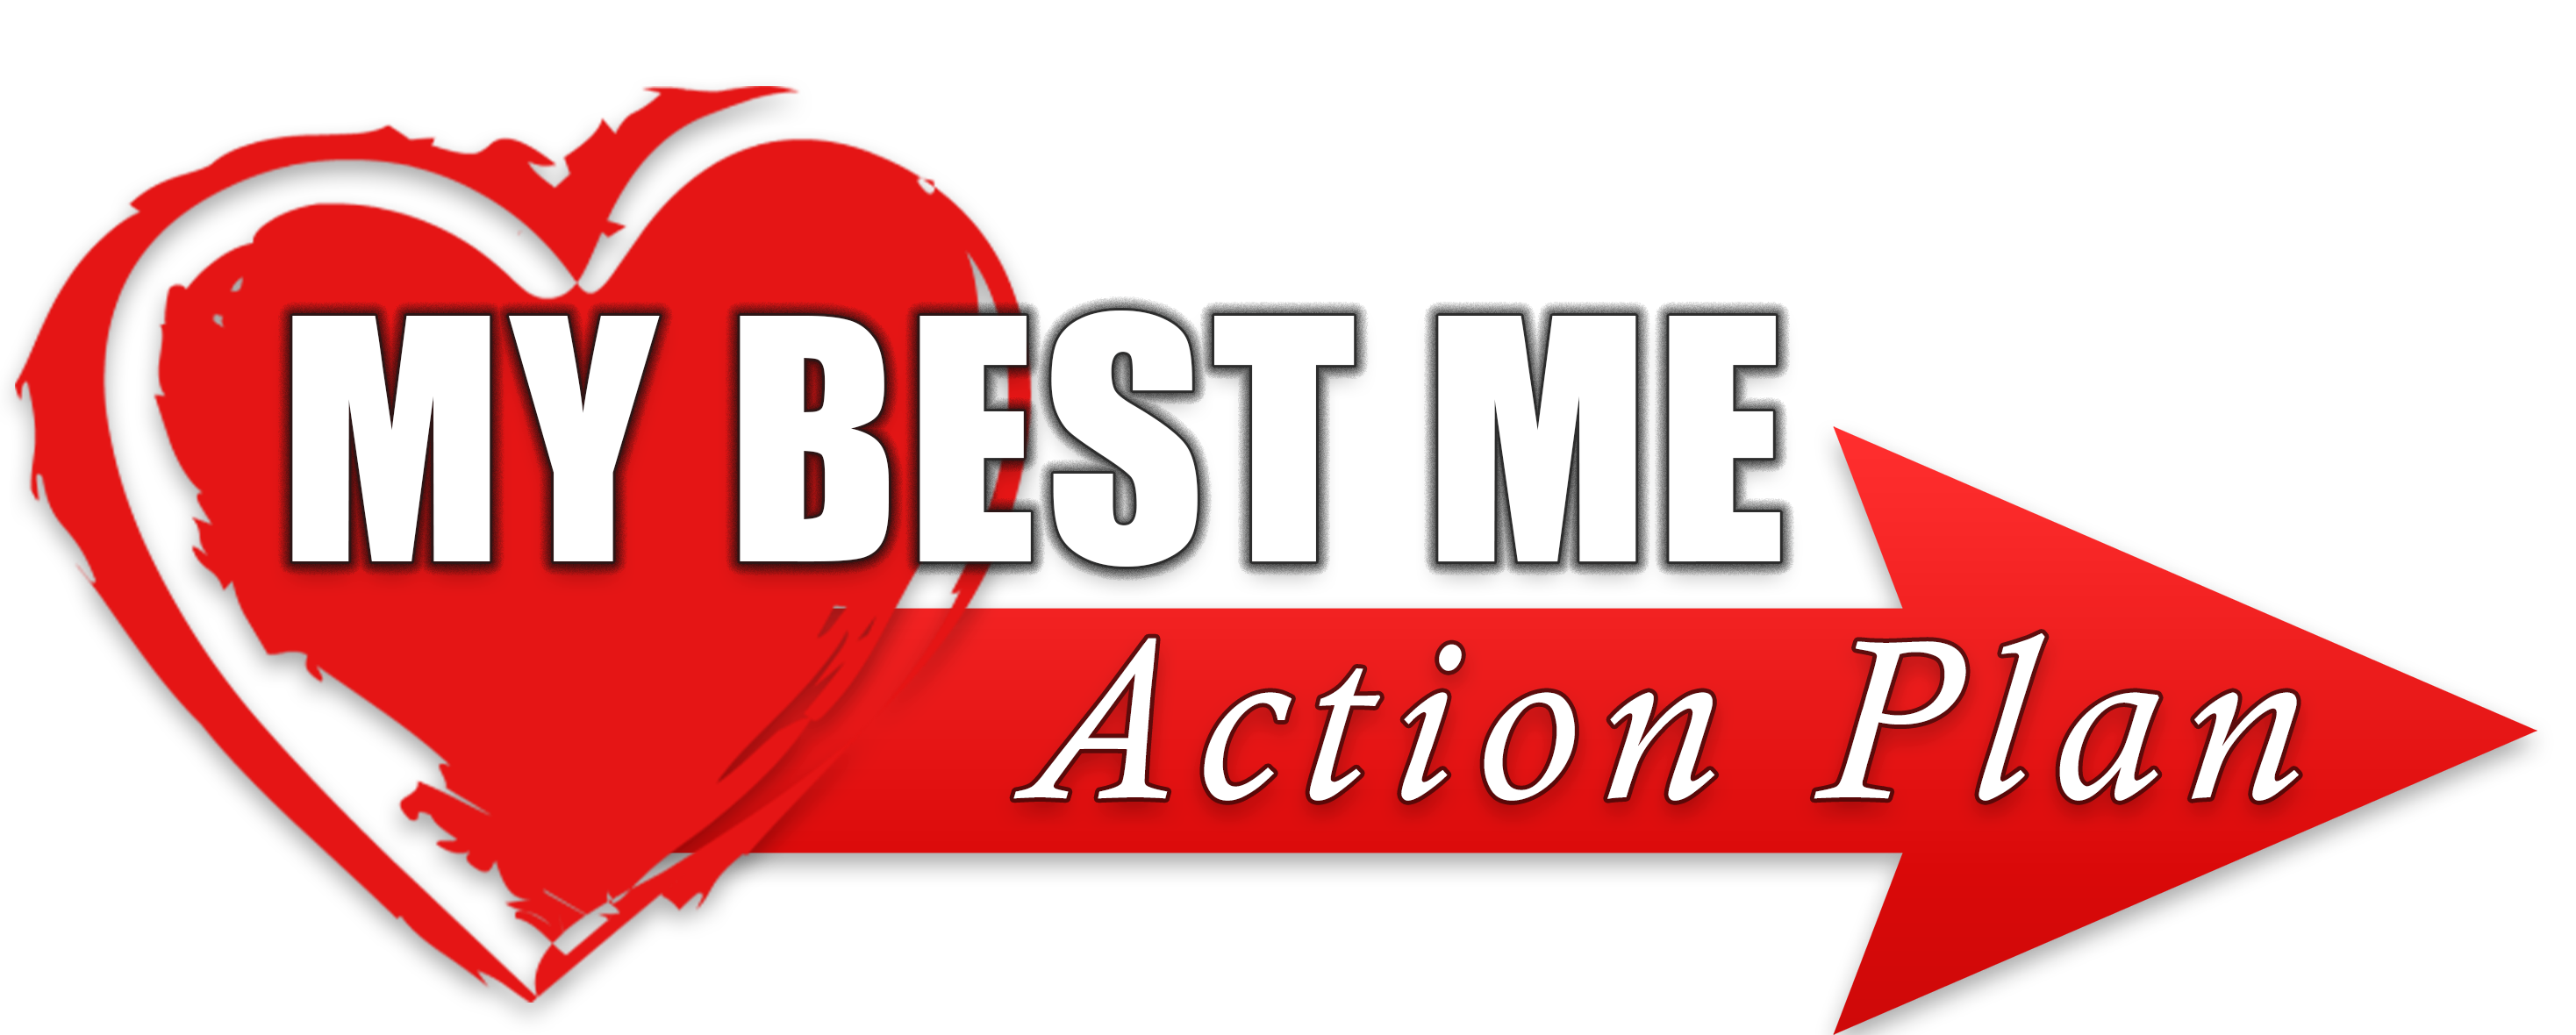 Welcome to My Best Me Action Plan 2